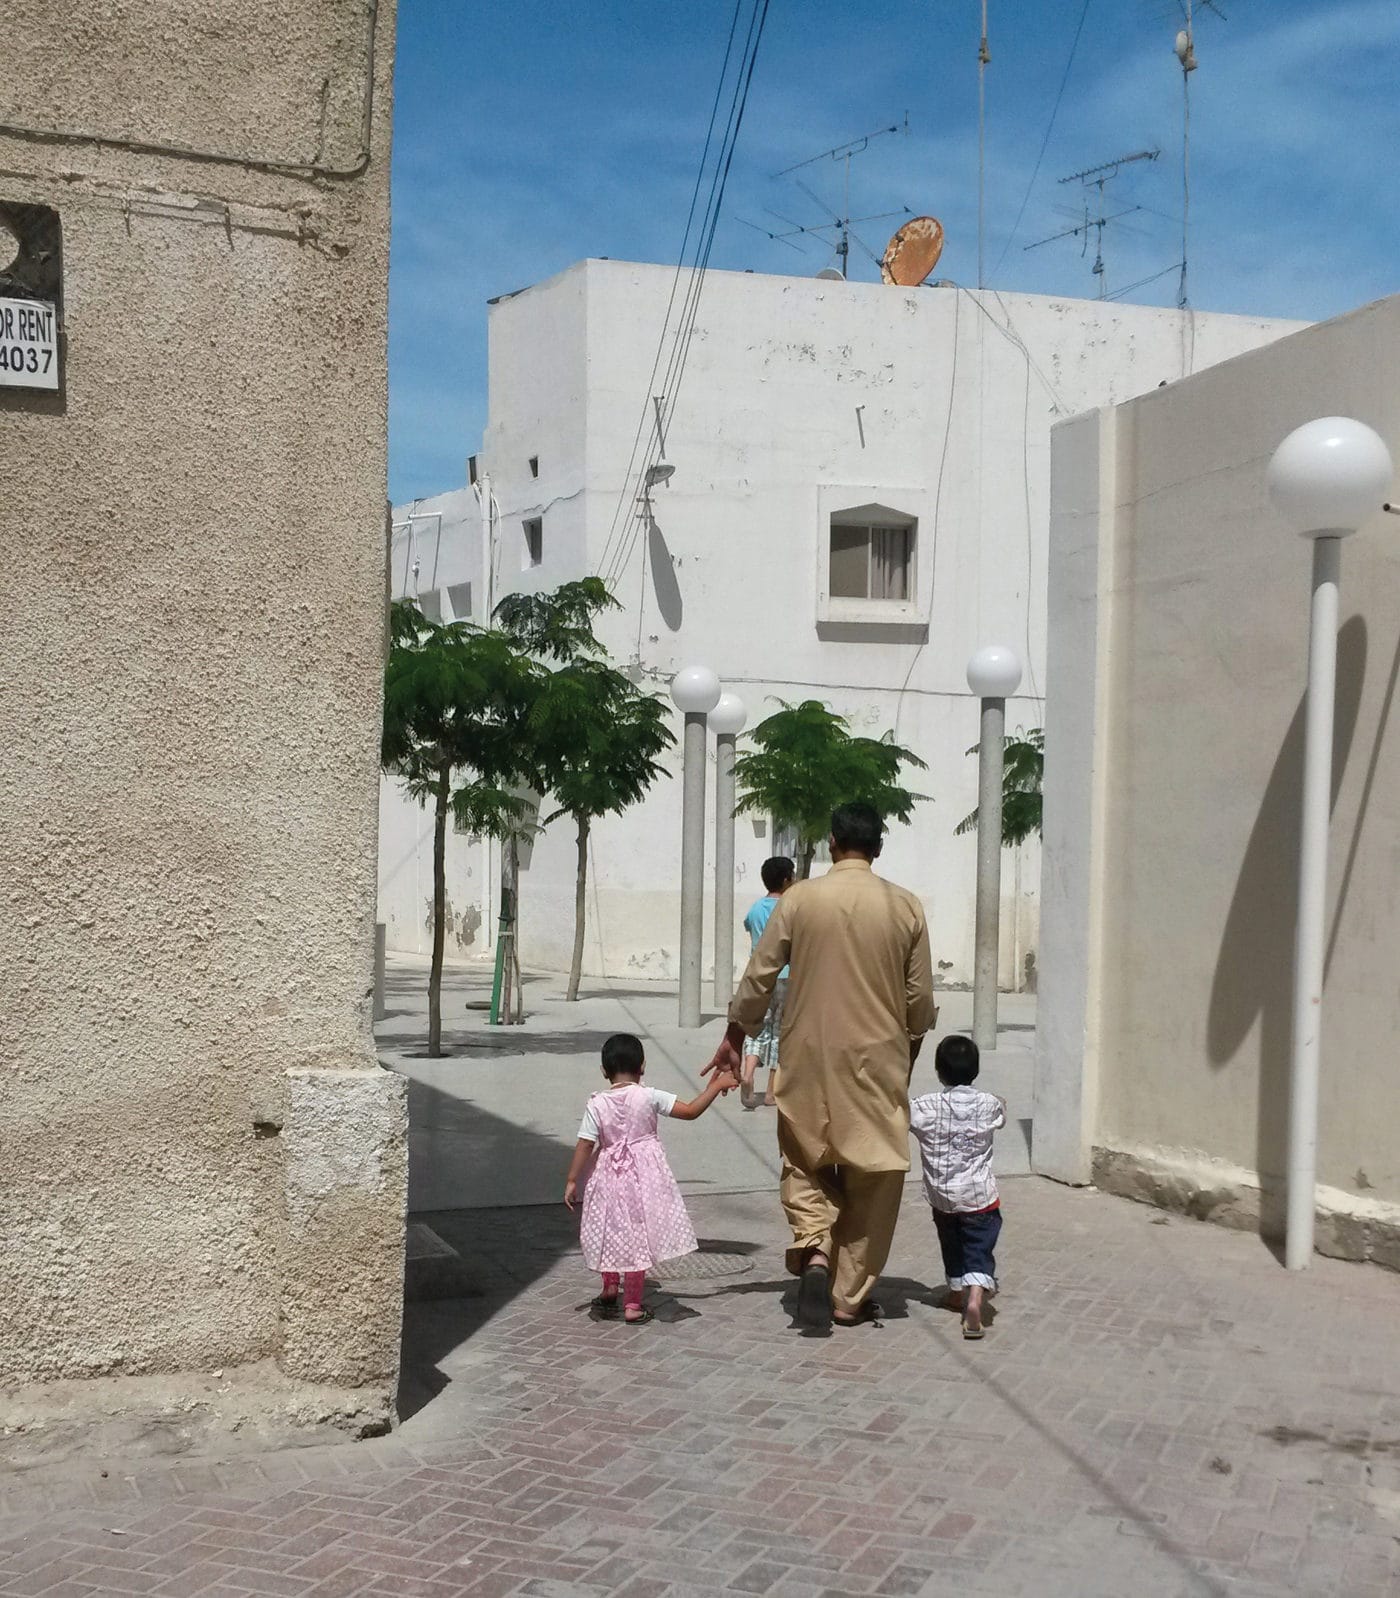 Bahrain: When Culture Promotes Sustainable Mobility